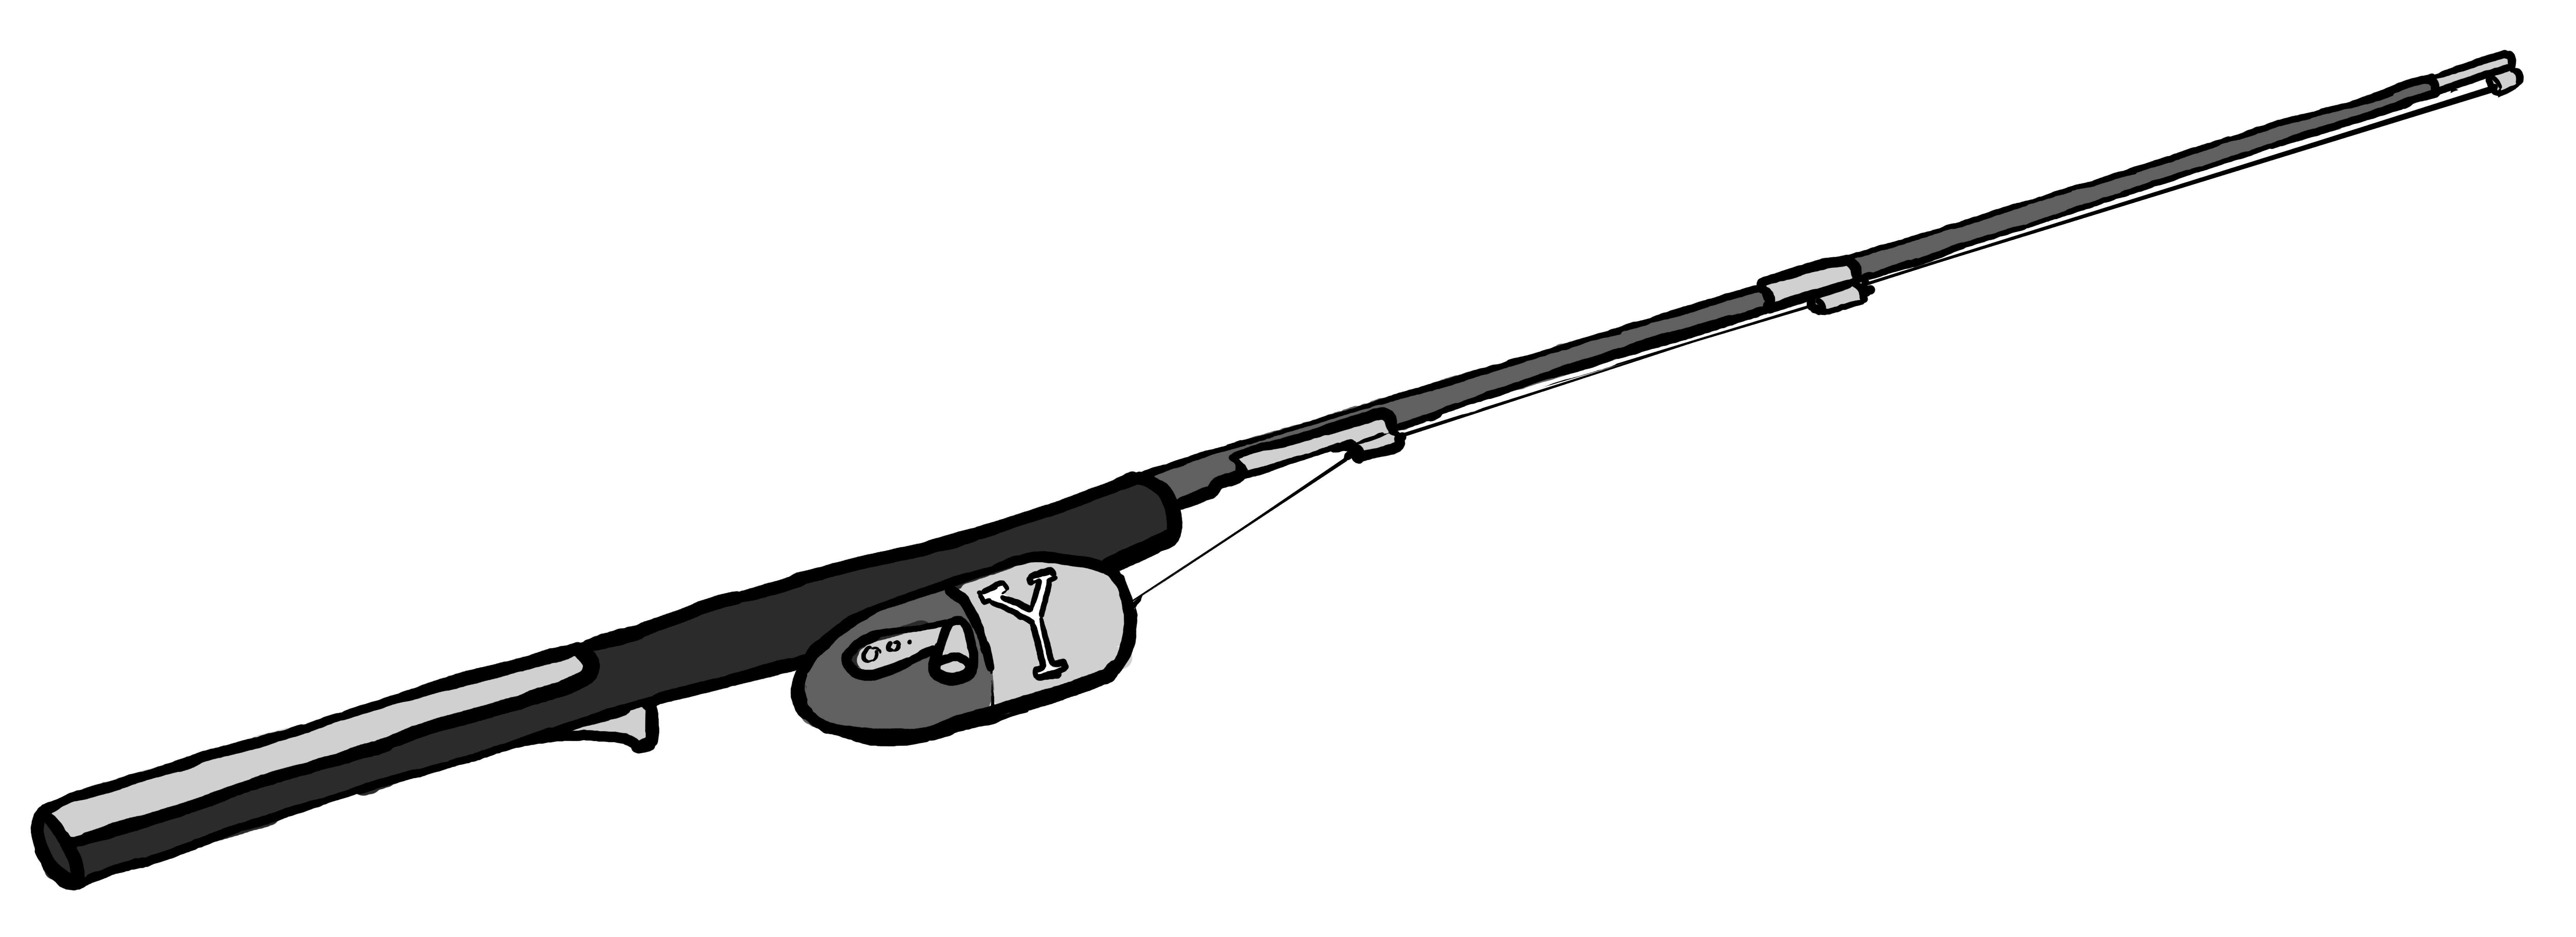 Fishing Pole Picture - ClipArt Best